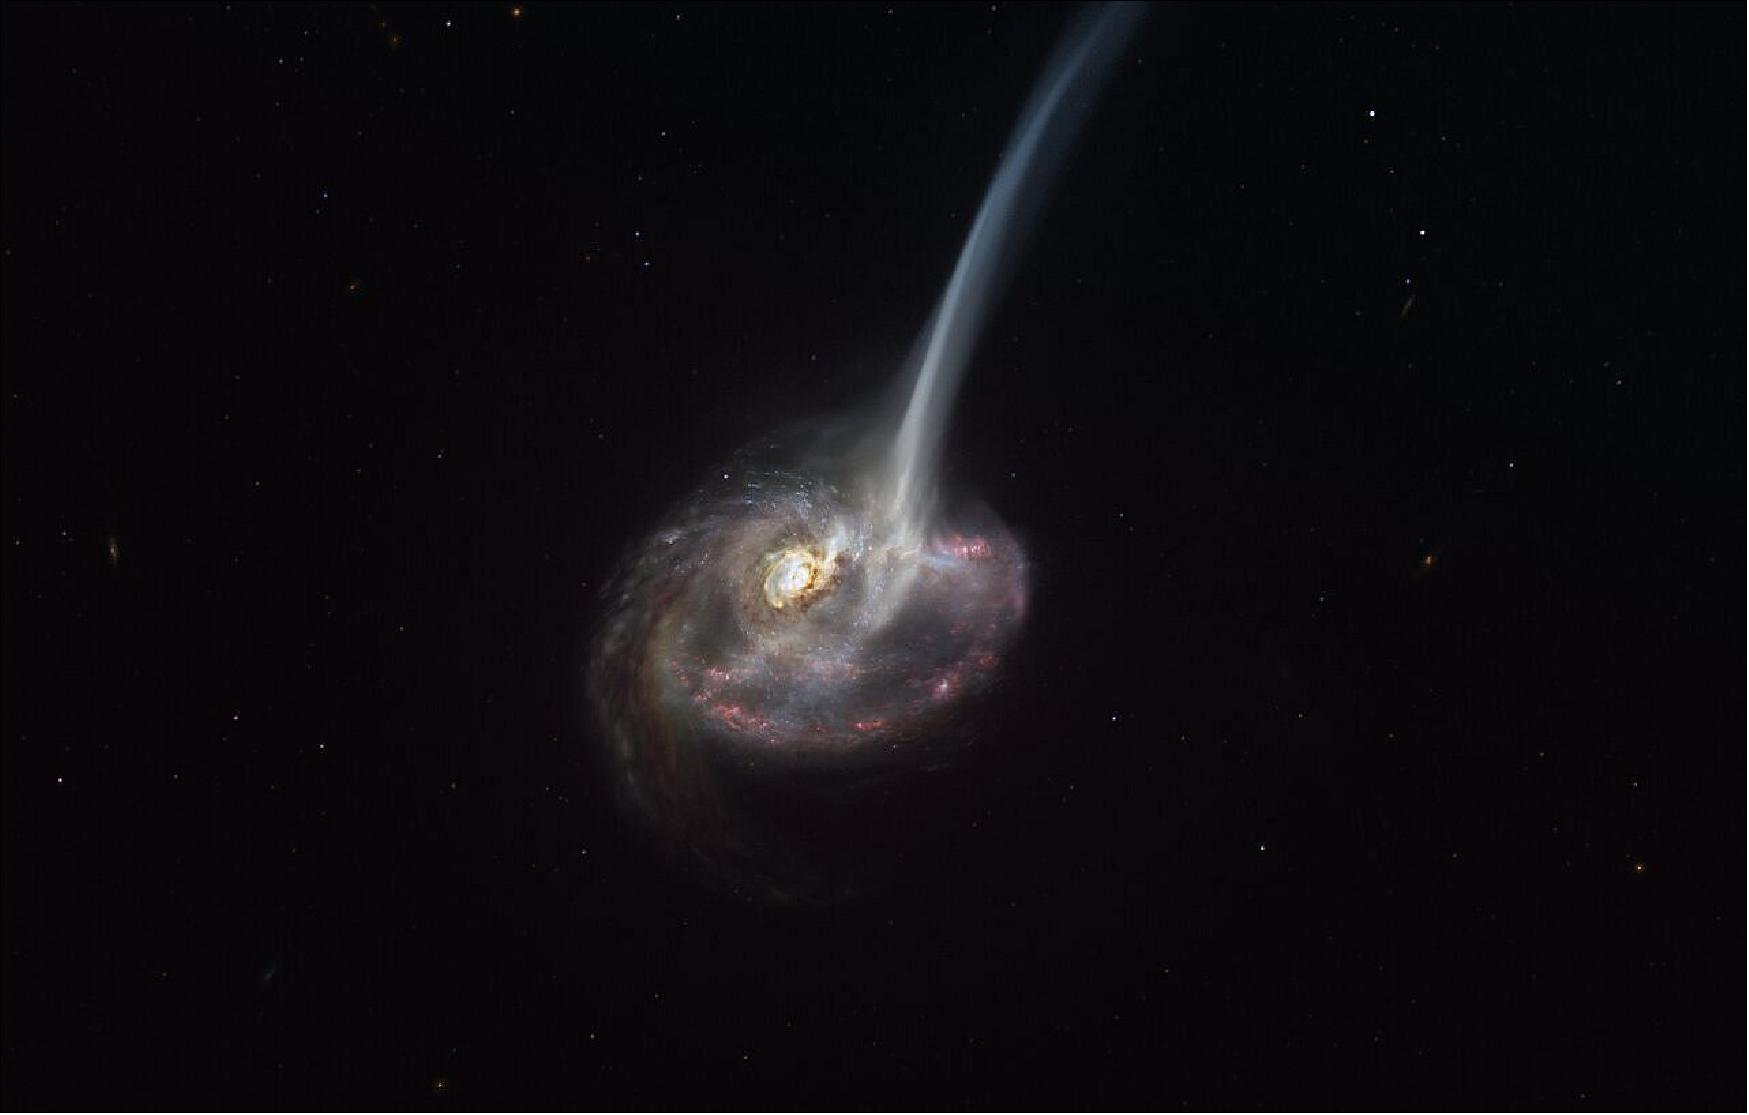 Figure 42: Artist’s representation of the ID2299 galaxy. Galaxies begin to “die” when they stop forming stars, but until now astronomers had never clearly glimpsed the start of this process in a far-away galaxy. Using the Atacama Large Millimeter/submillimeter Array (ALMA), in which the European Southern Observatory (ESO) is a partner, astronomers have seen a galaxy ejecting nearly half of its star-forming gas. This ejection is happening at a startling rate, equivalent to 10 000 Suns-worth of gas a year — the galaxy is rapidly losing its fuel to make new stars. The team believes that this spectacular event was triggered by a collision with another galaxy, which could lead astronomers to rethink how galaxies stop bringing new stars to life (image credit: ESO, M. Kornmesser)